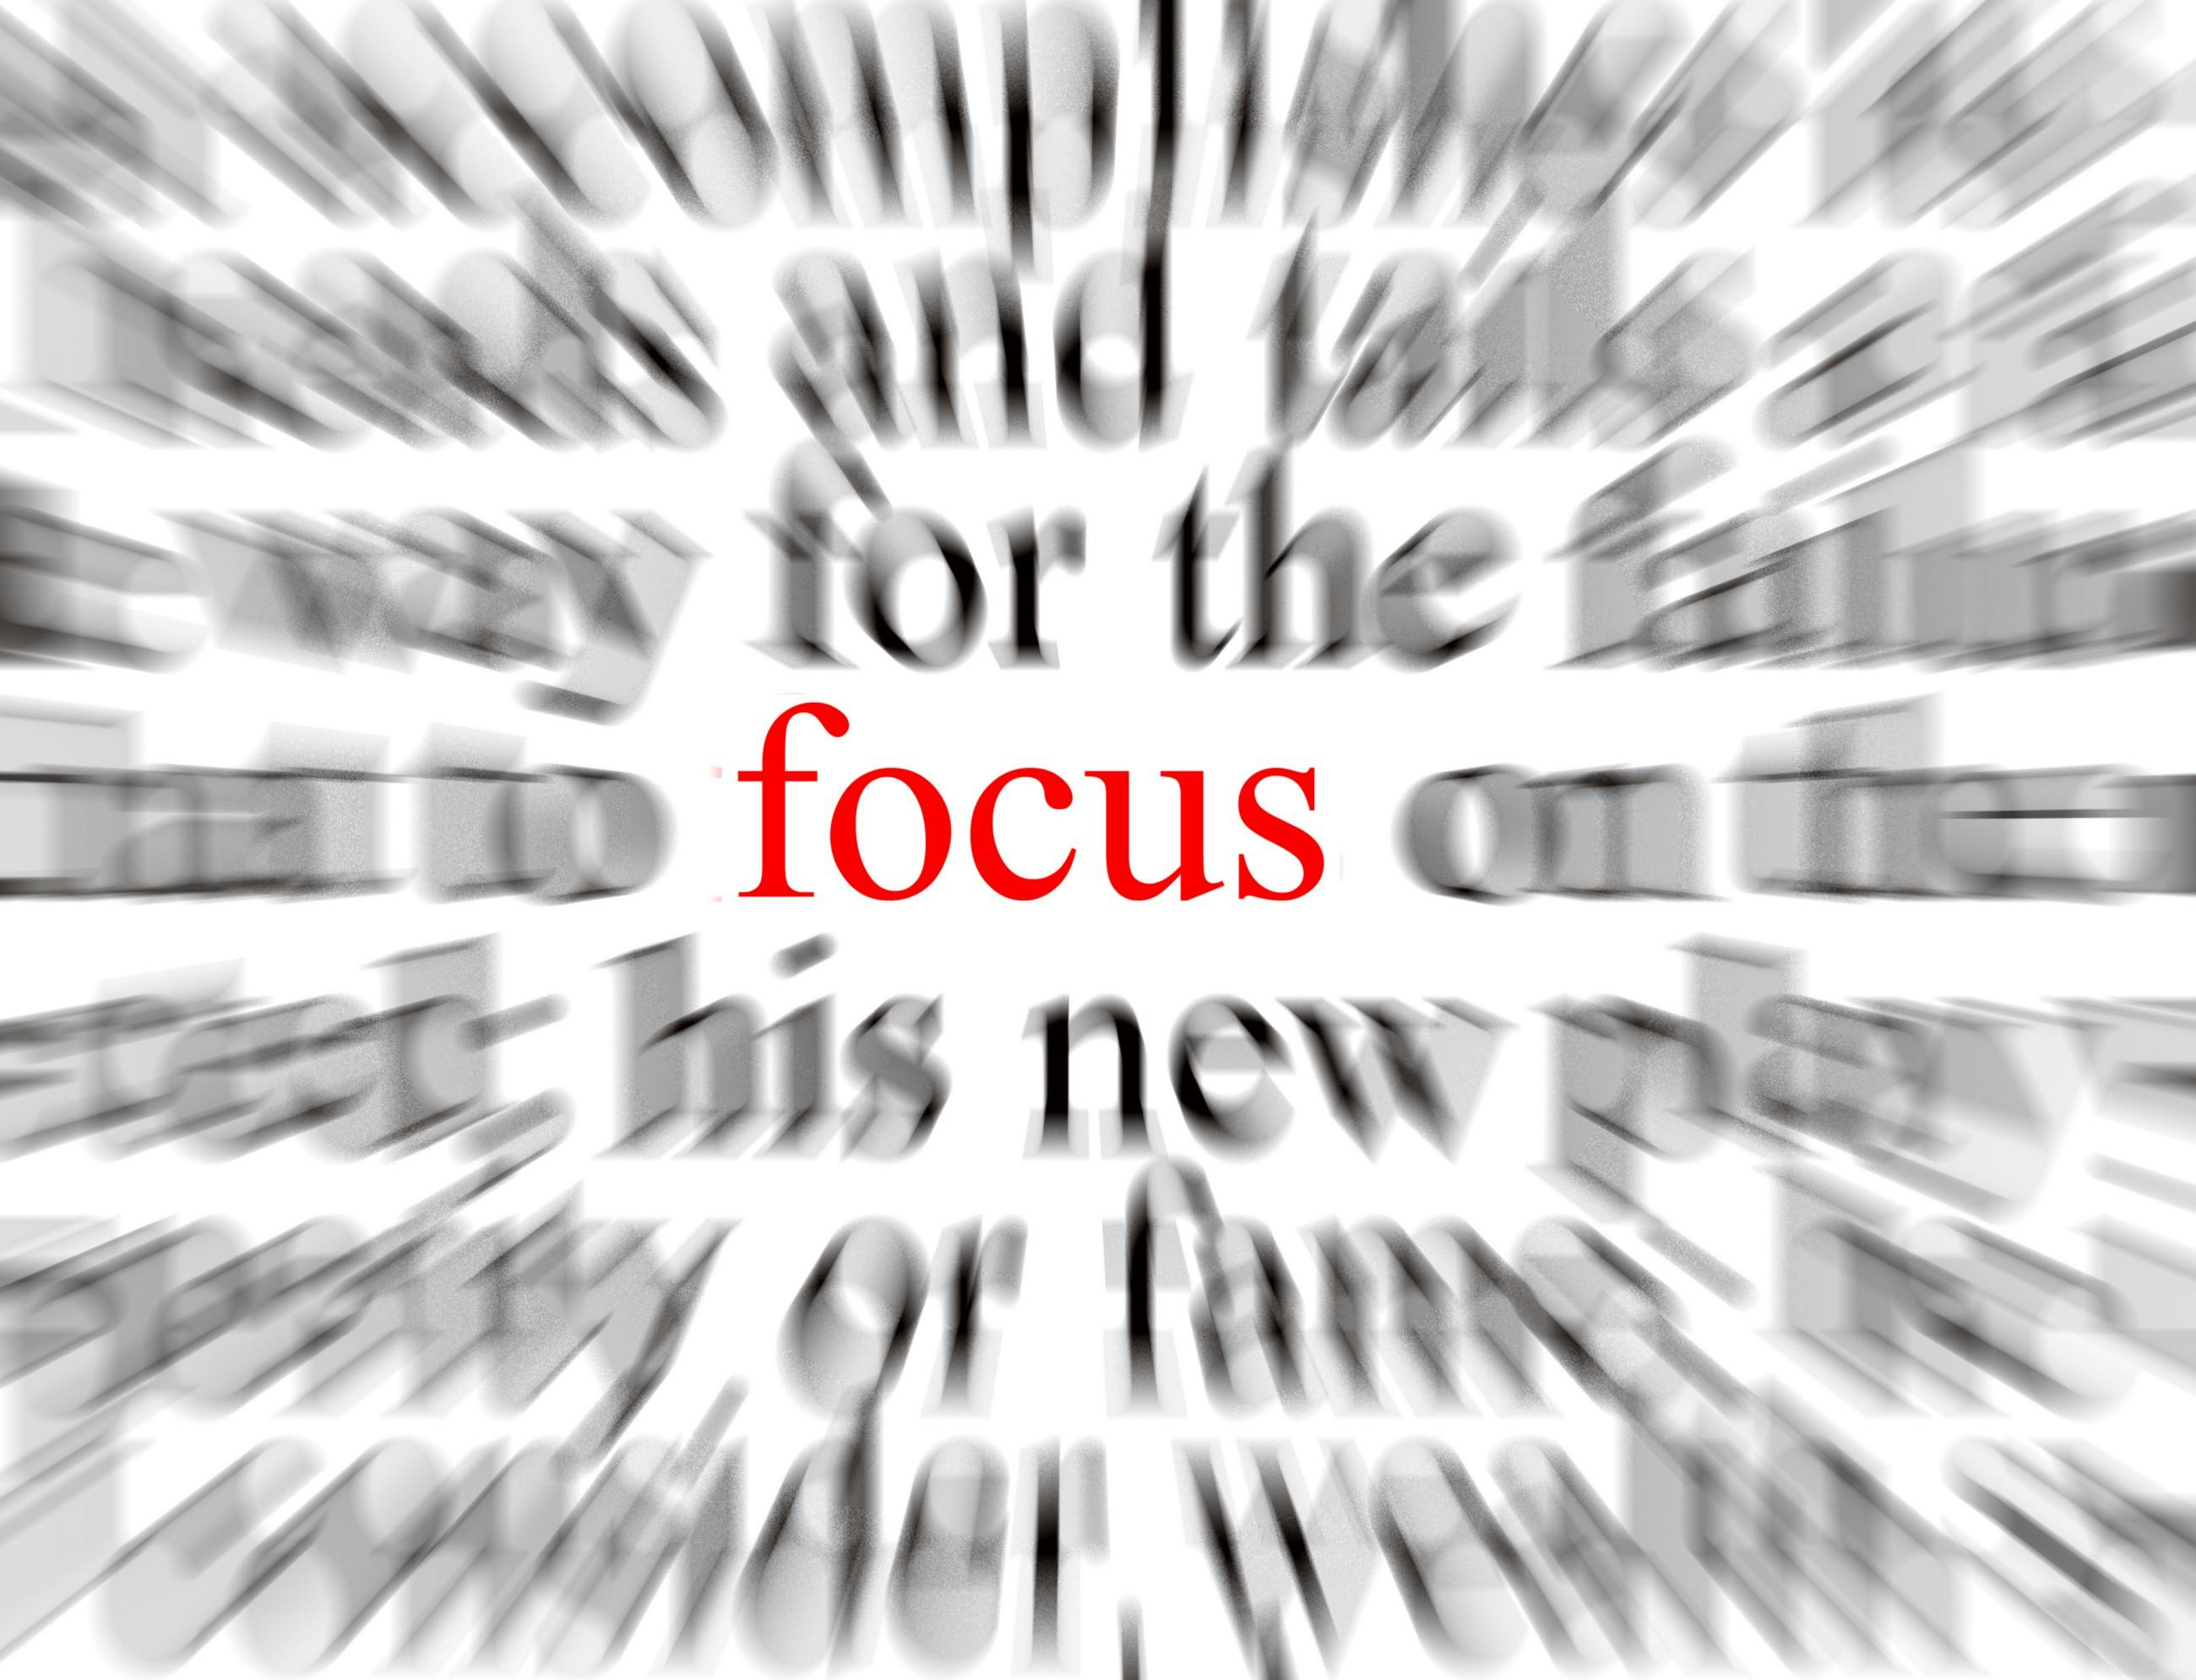 /6-habits-to-stay-focused-at-your-computer-905c24ef62e3 feature image